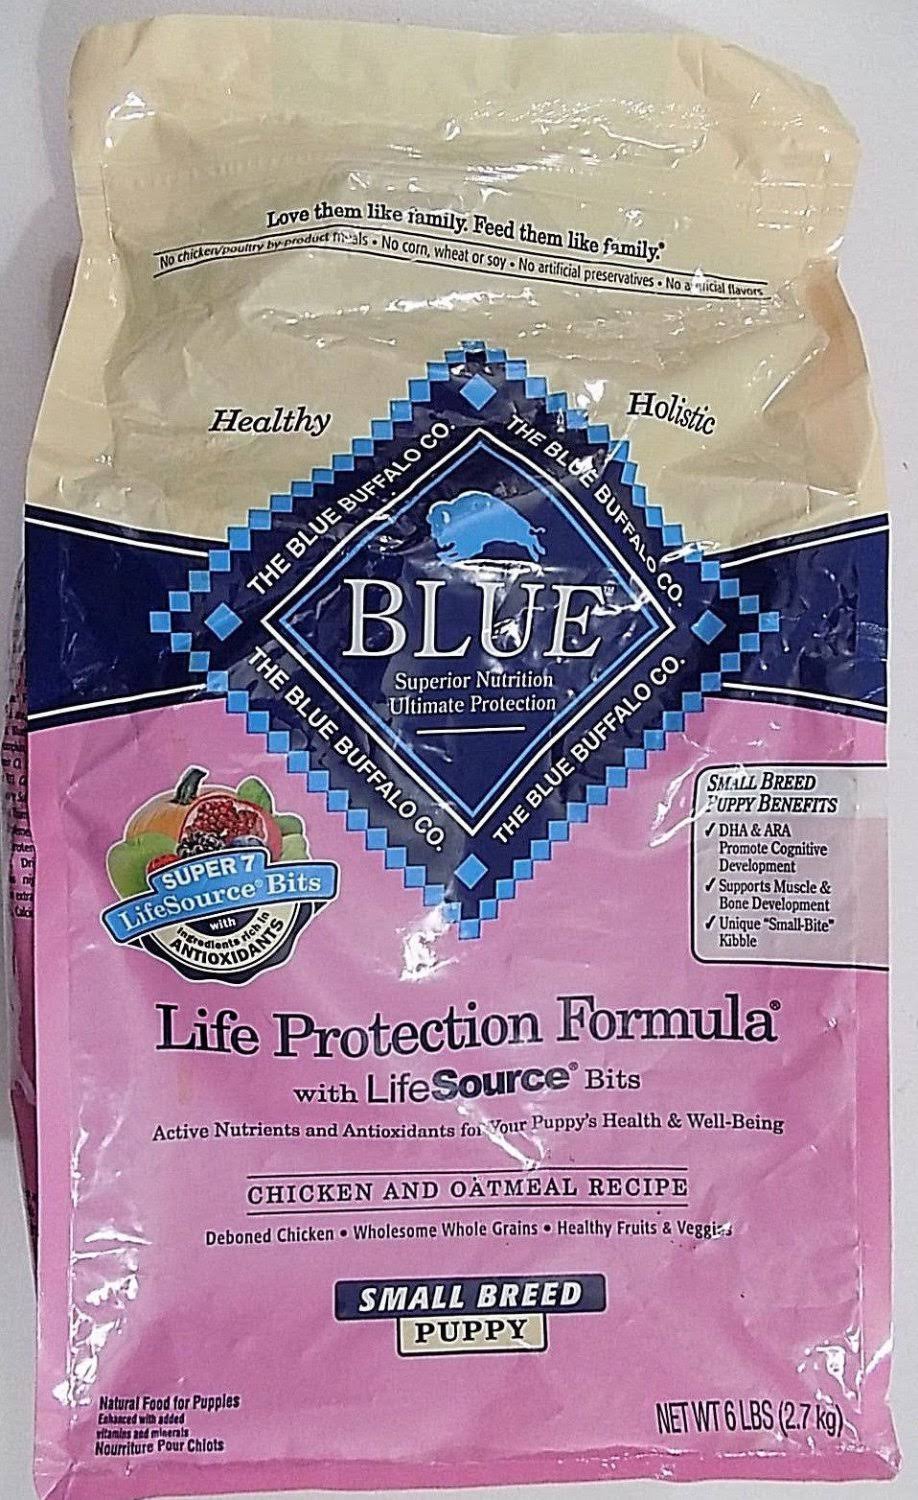 Blue Buffalo Life Protection Formula Puppy Food - Chicken and Oatmeal Rice, 6lbs